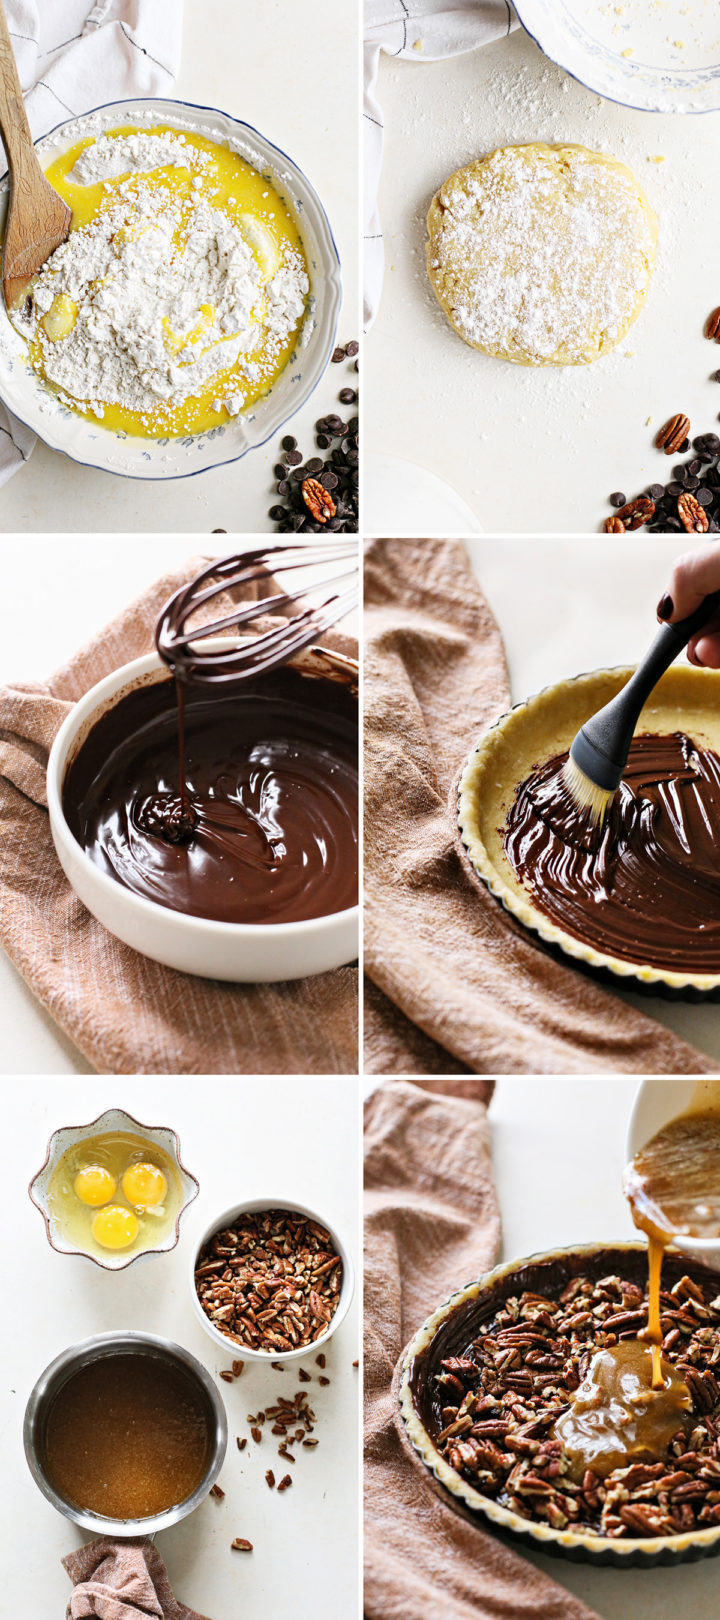 step by step photos showing how to make a chocolate pecan tarts recipe